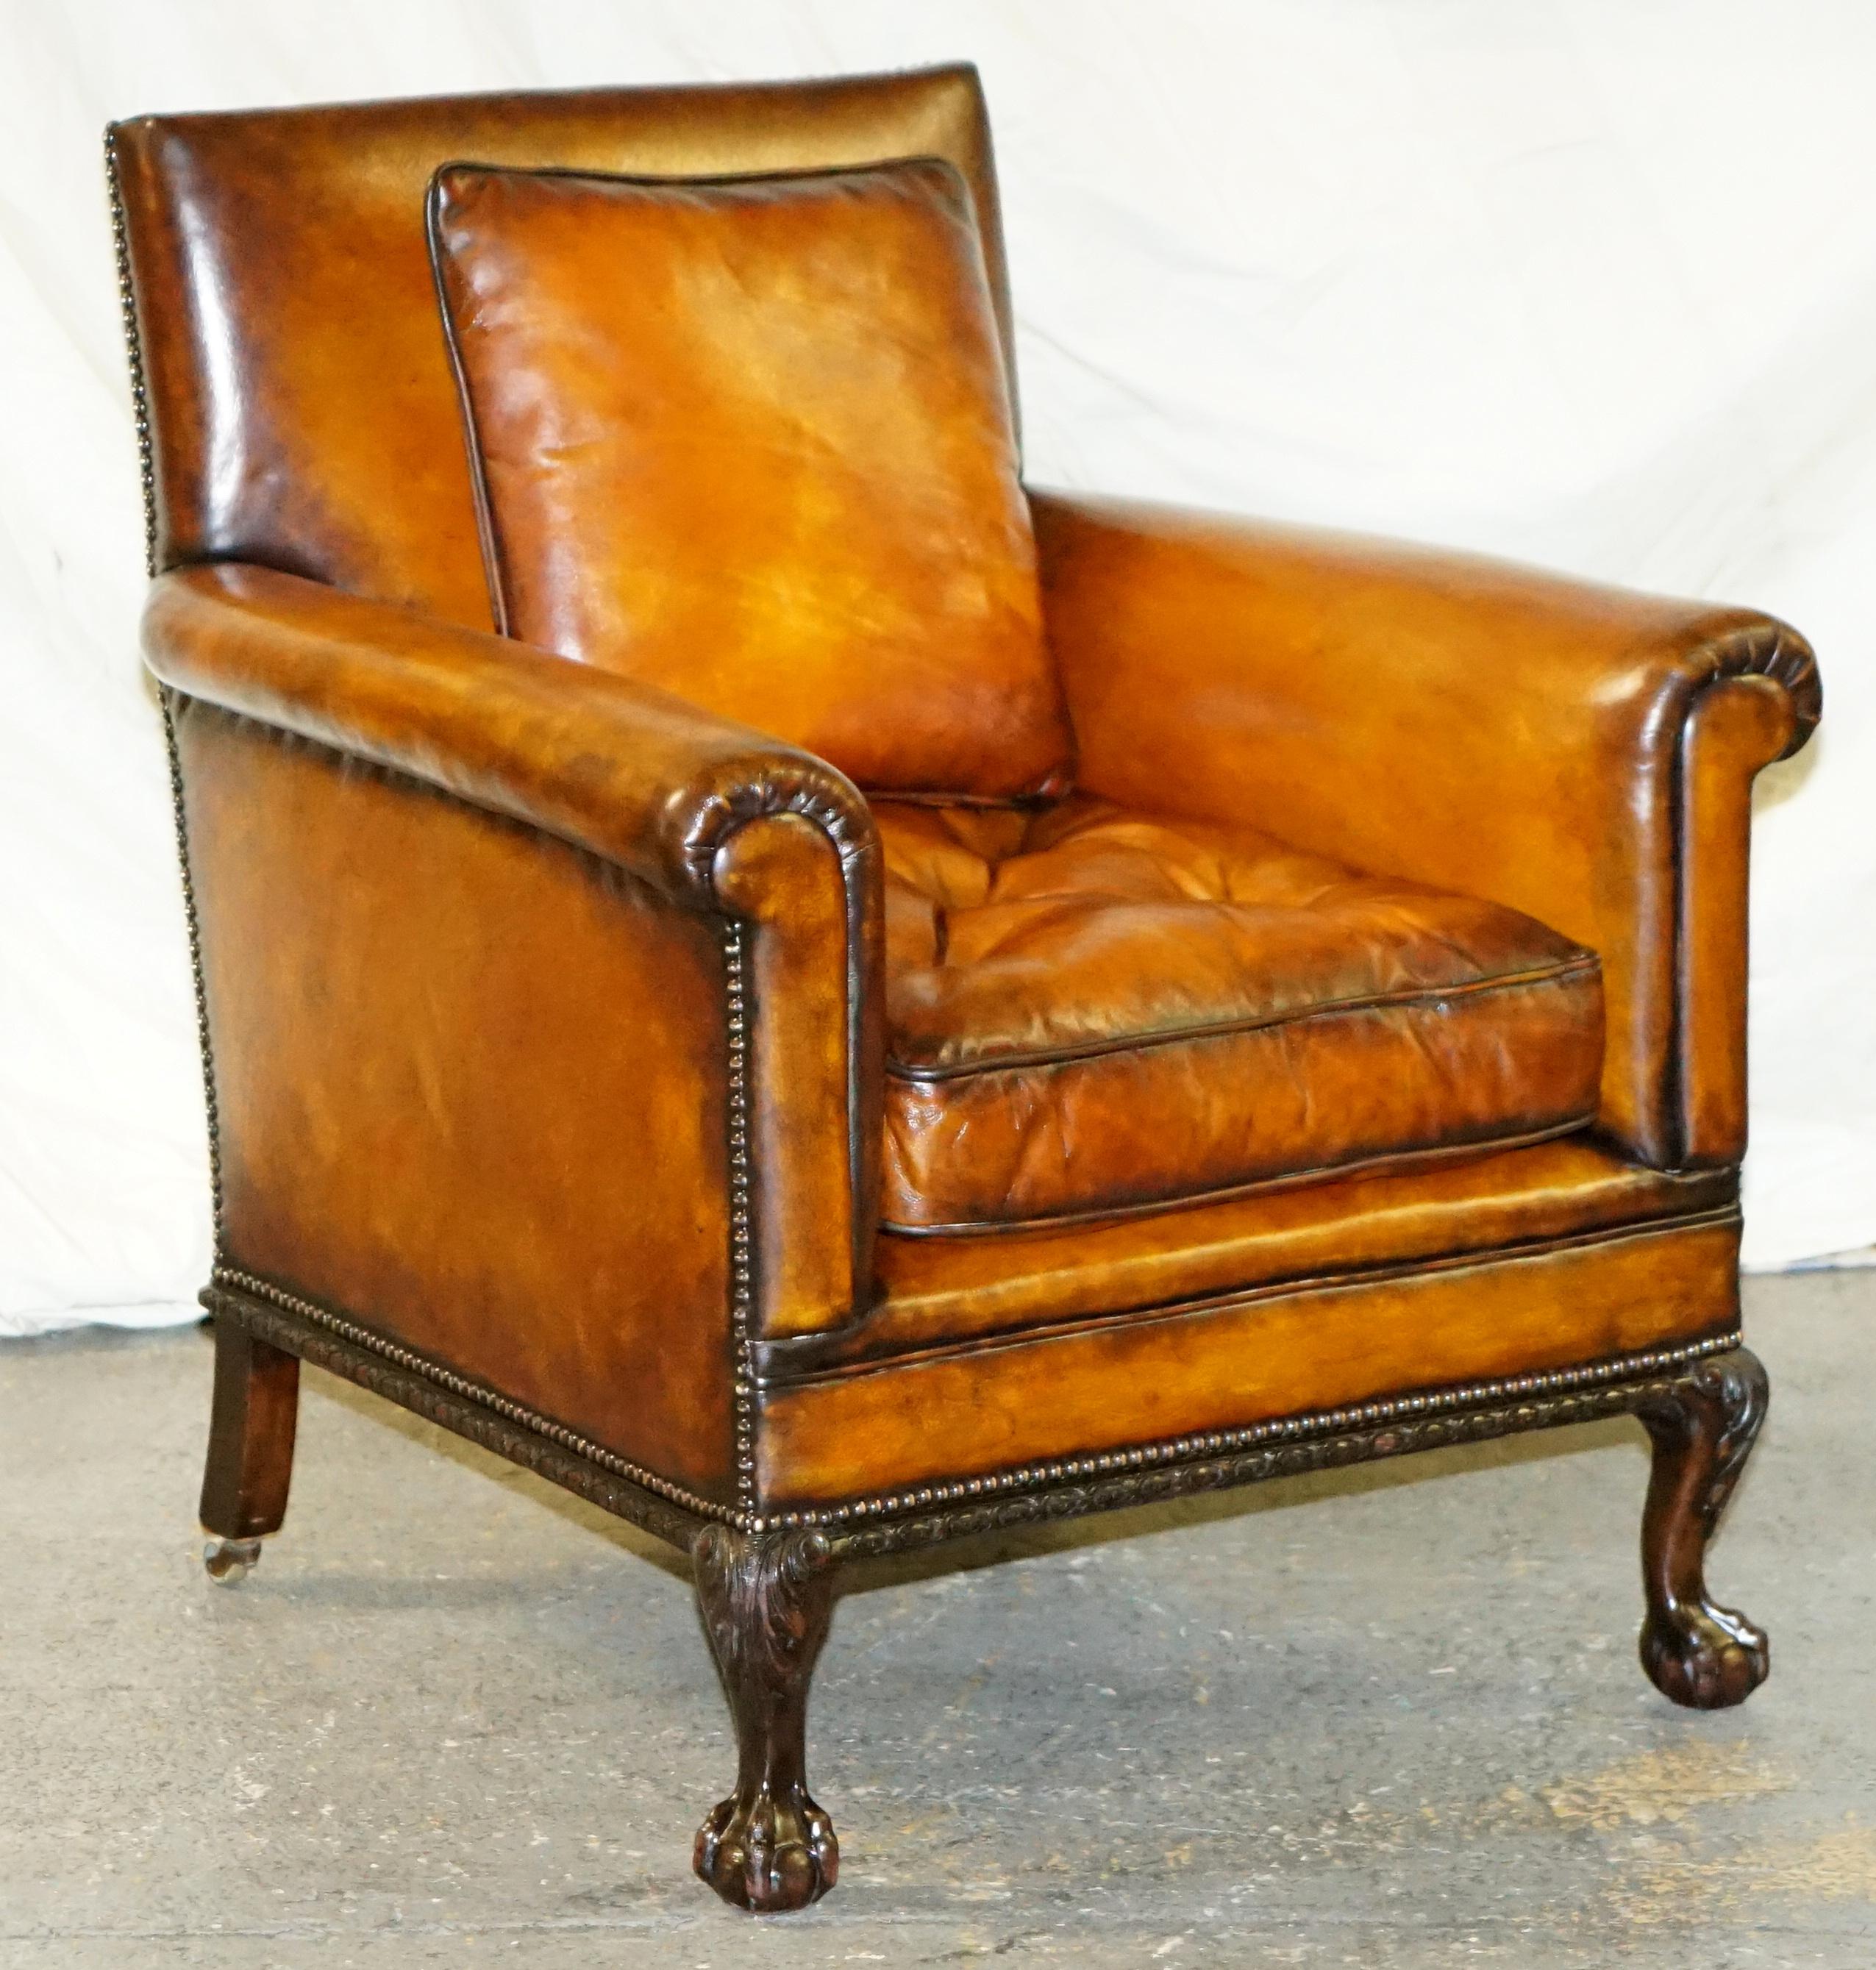 We are delighted to offer for sale this stunning and original pair of circa 1860 club armchairs with hand carved claw & ball feet and brown leather upholstery

A very original and good looking pair, it is rare to find club armchairs from this